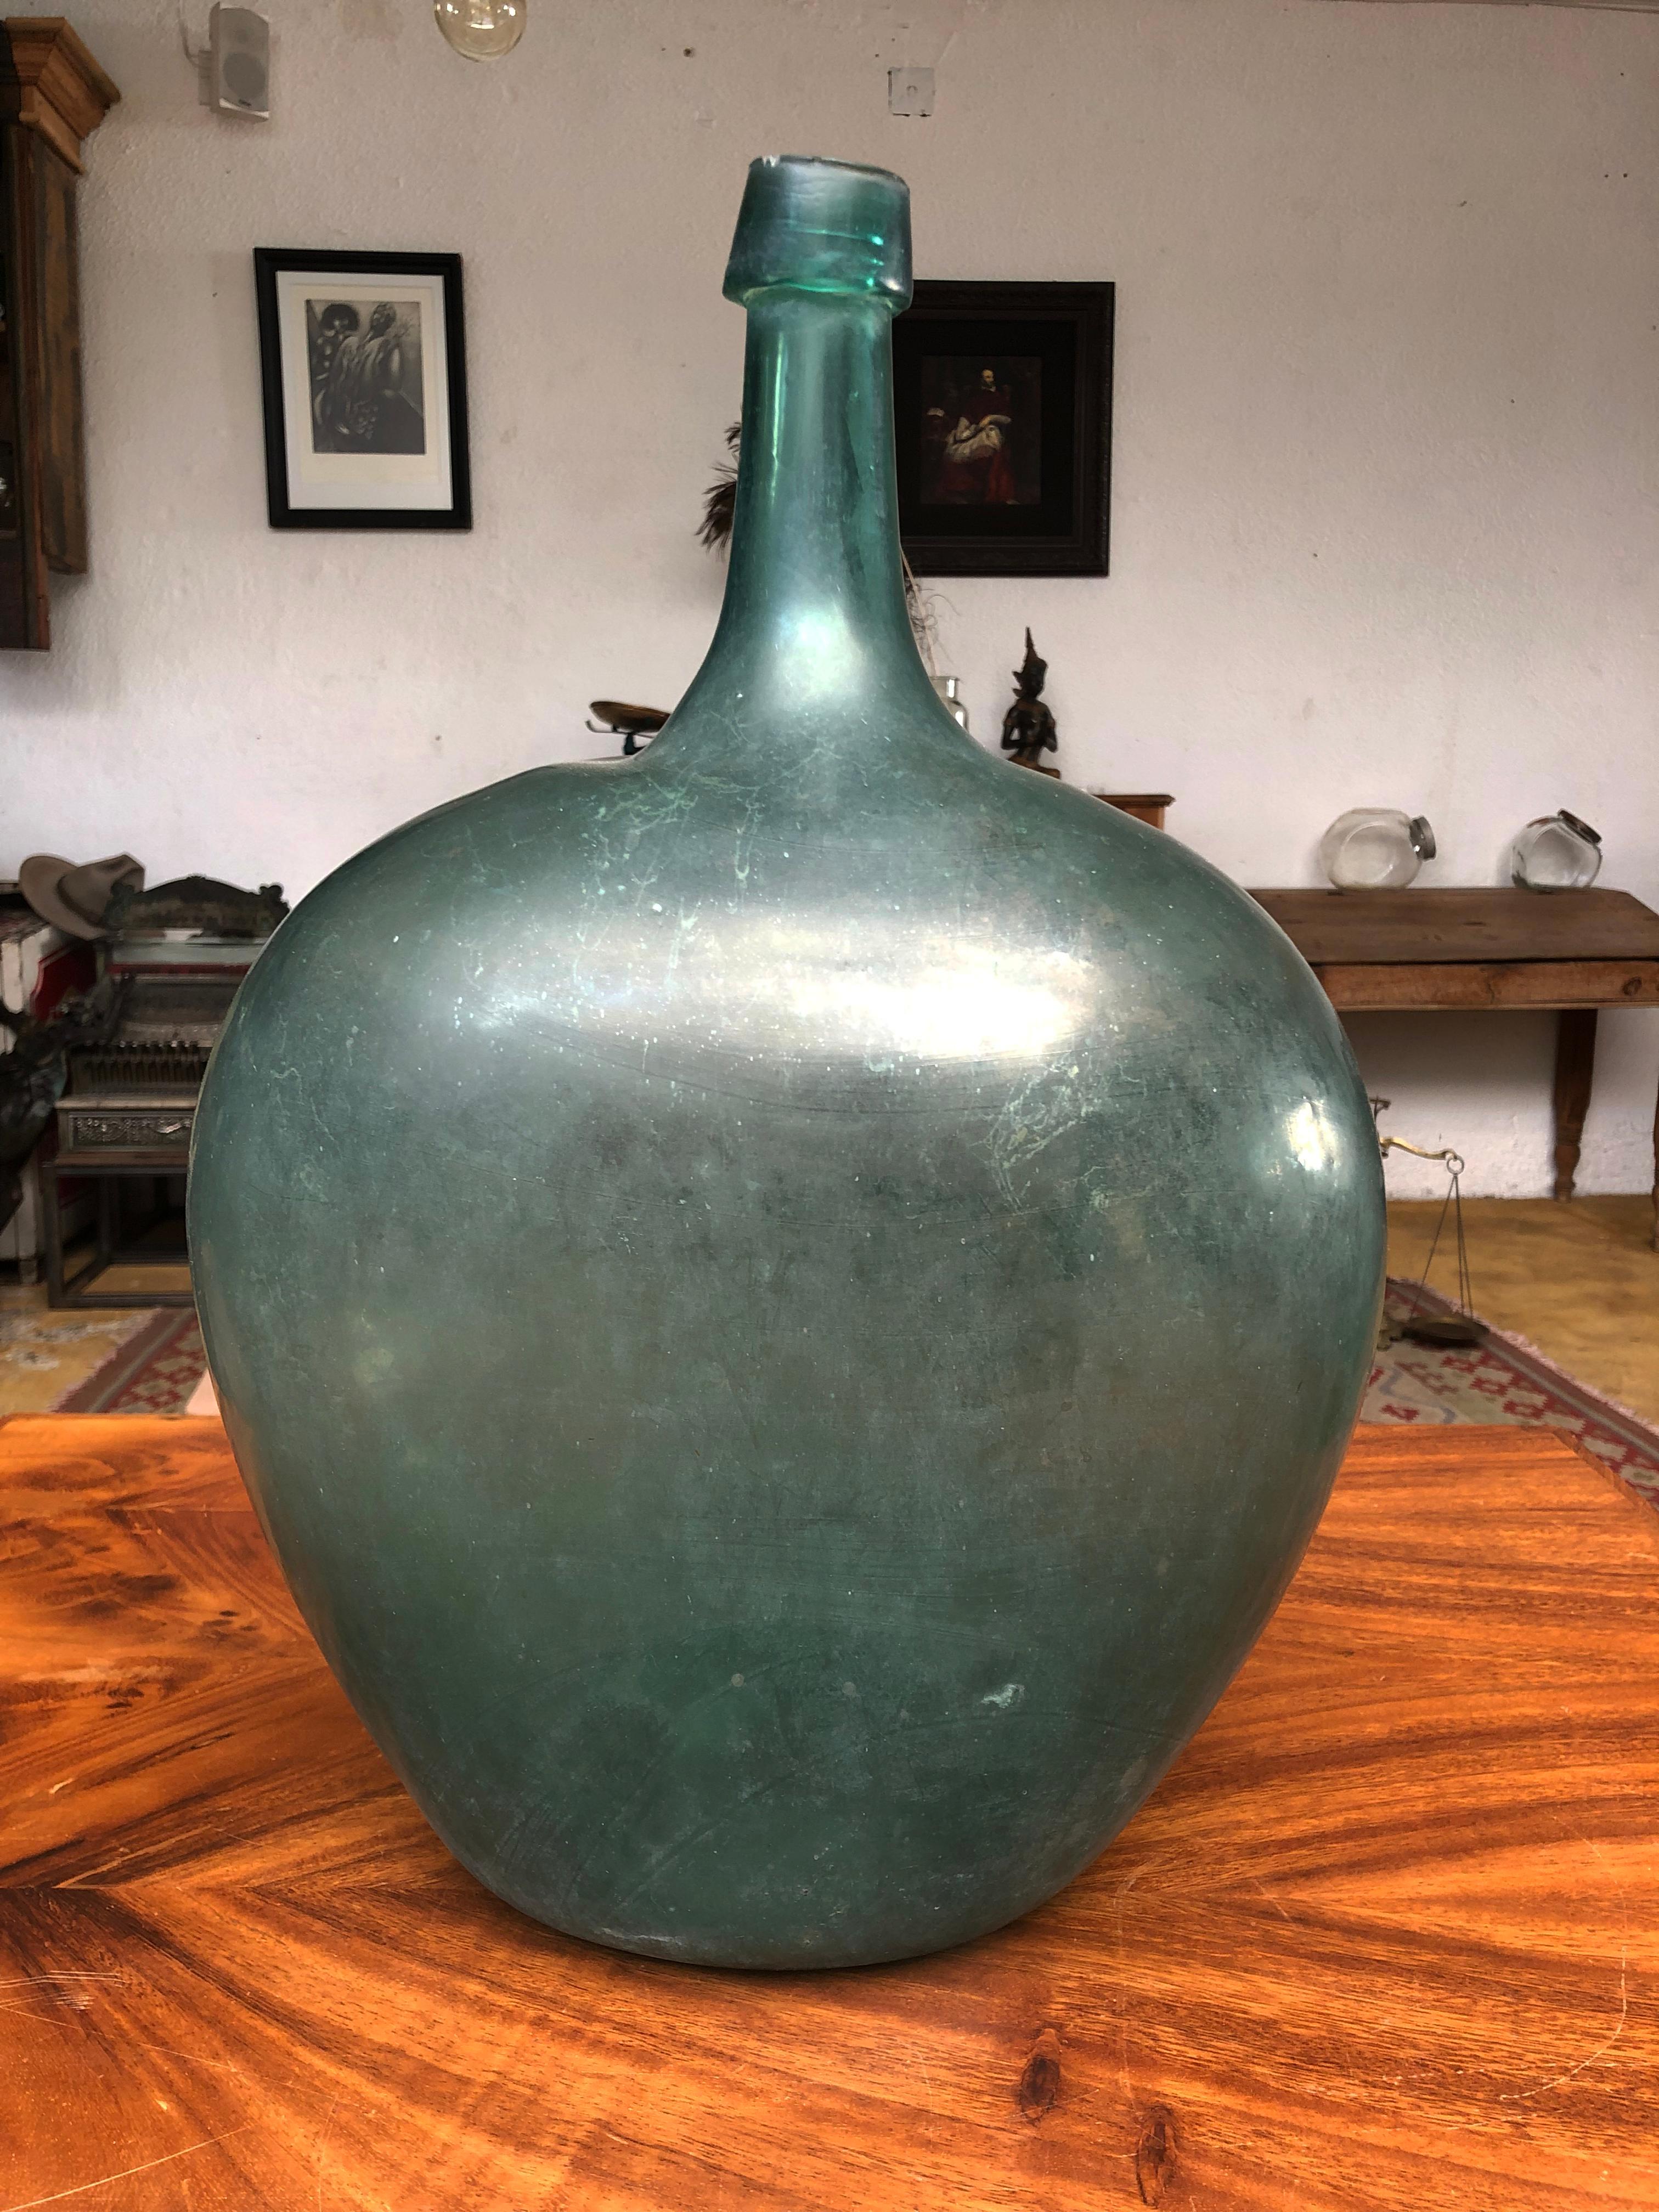 Late 19th century blown glass light blue demijohn bottle with a beautiful bold irregular sculptural form and a very deep dished pontil. Dating anywhere from the late 18th-early part of the 19th century.